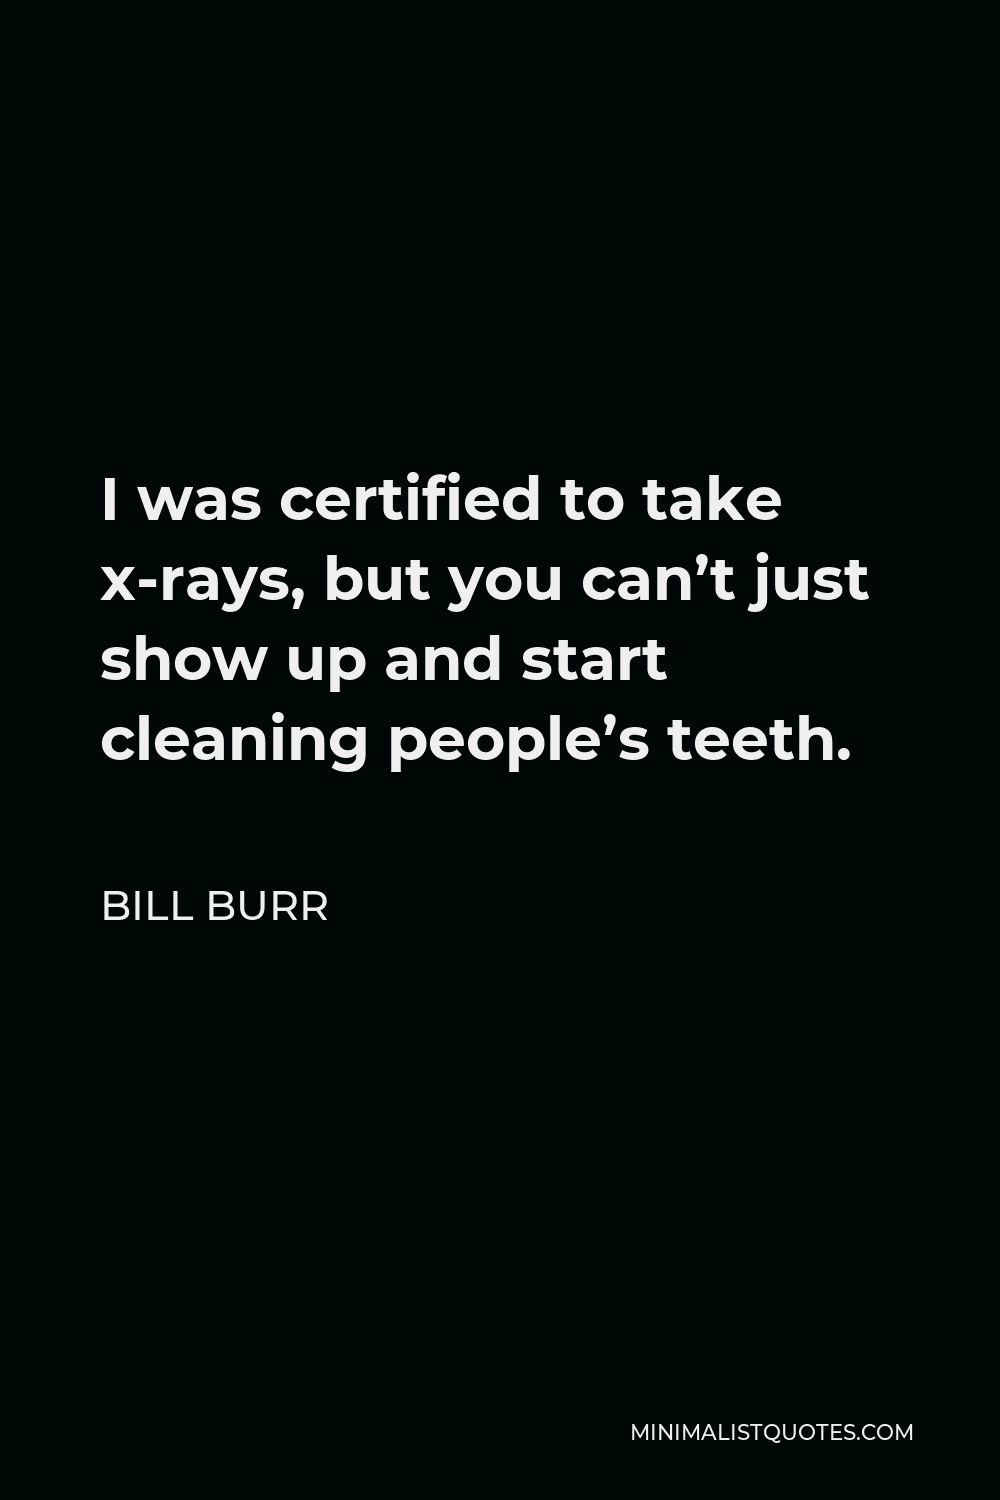 Bill Burr Quote - I was certified to take x-rays, but you can’t just show up and start cleaning people’s teeth.